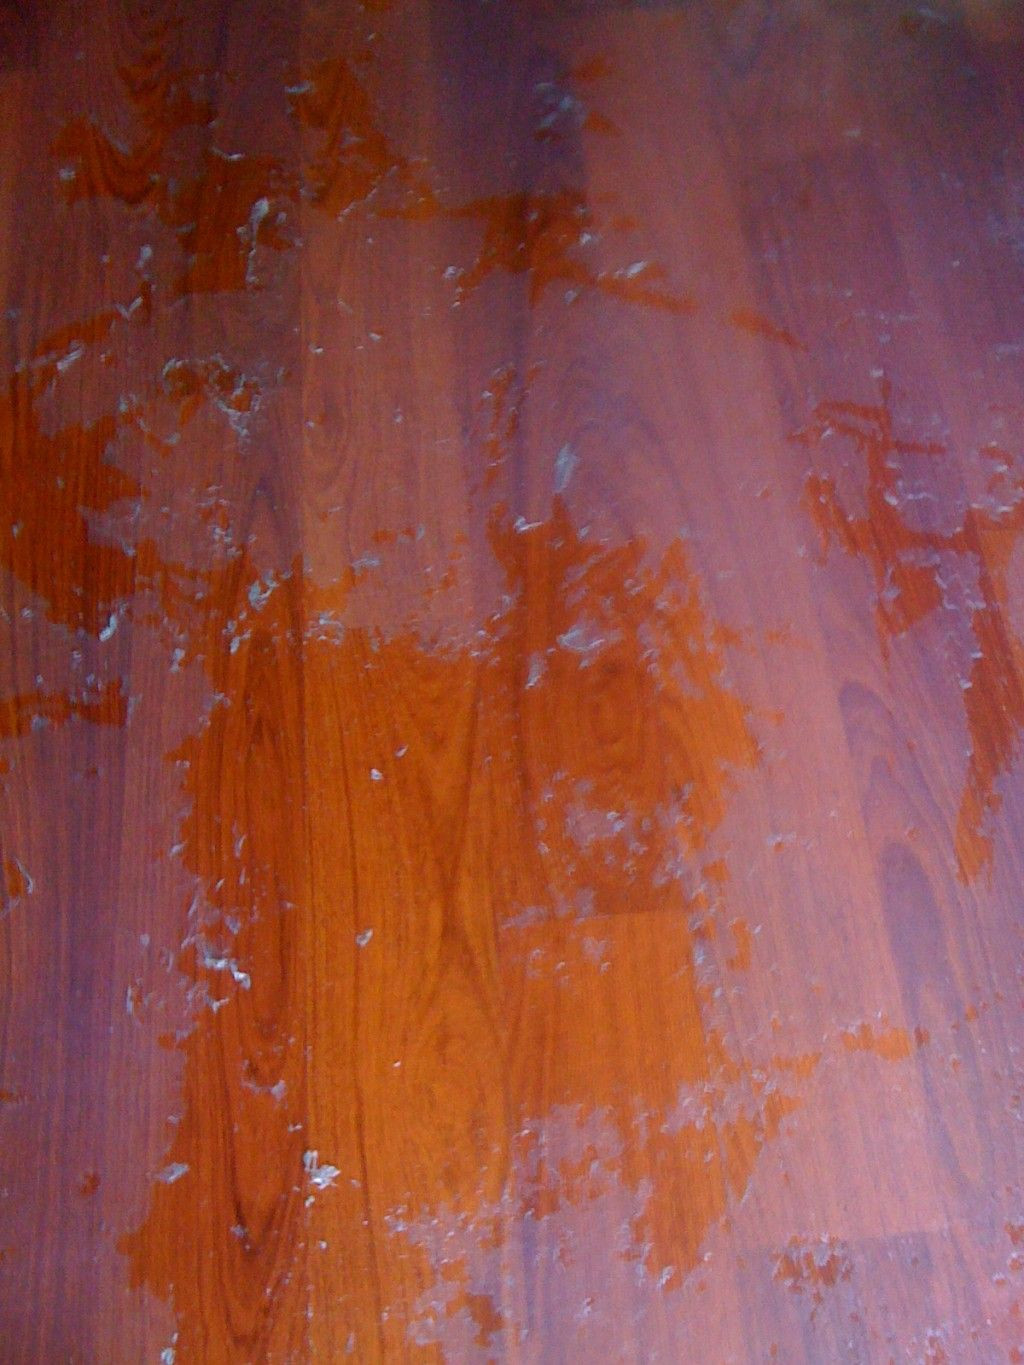 25 Great which Direction Should Hardwood Floors Be Laid 2024 free download which direction should hardwood floors be laid of how to remove wax and oil soap cleaners from wood floors recipes pertaining to how to remove oily or wax build up from cleaning or polishing